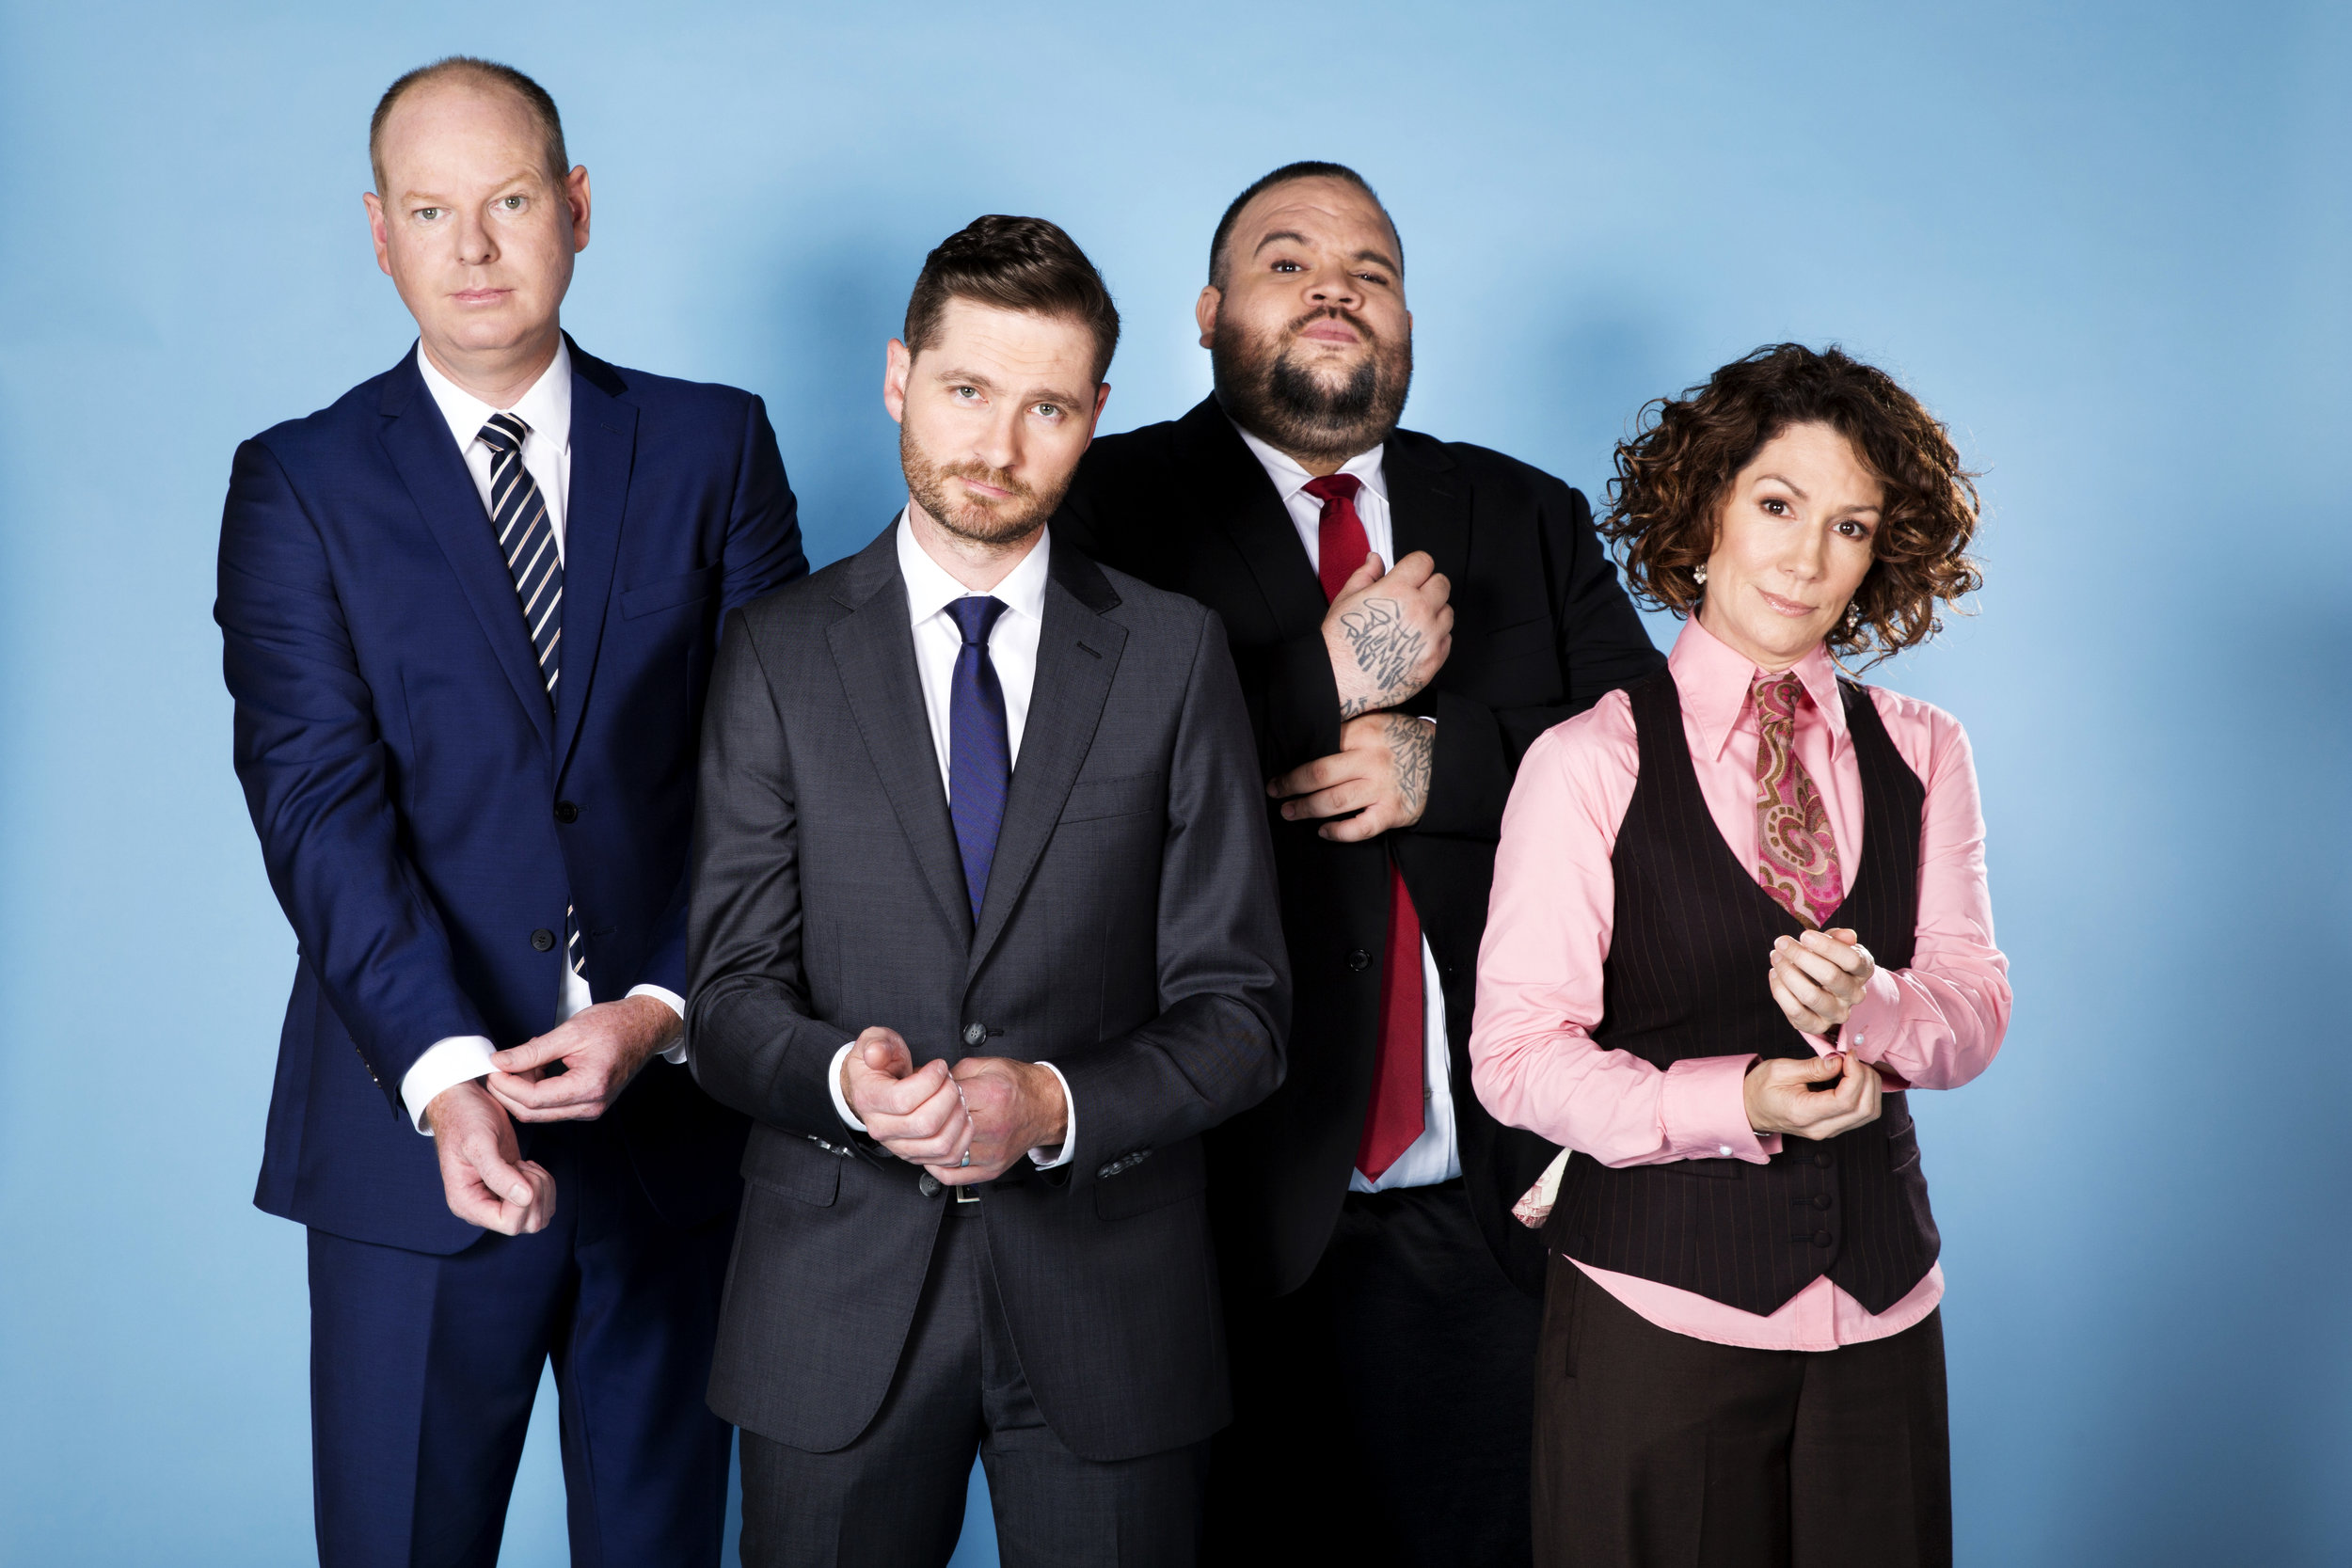   The Yearly with Charlie Pickering 2017  Image - ABC 